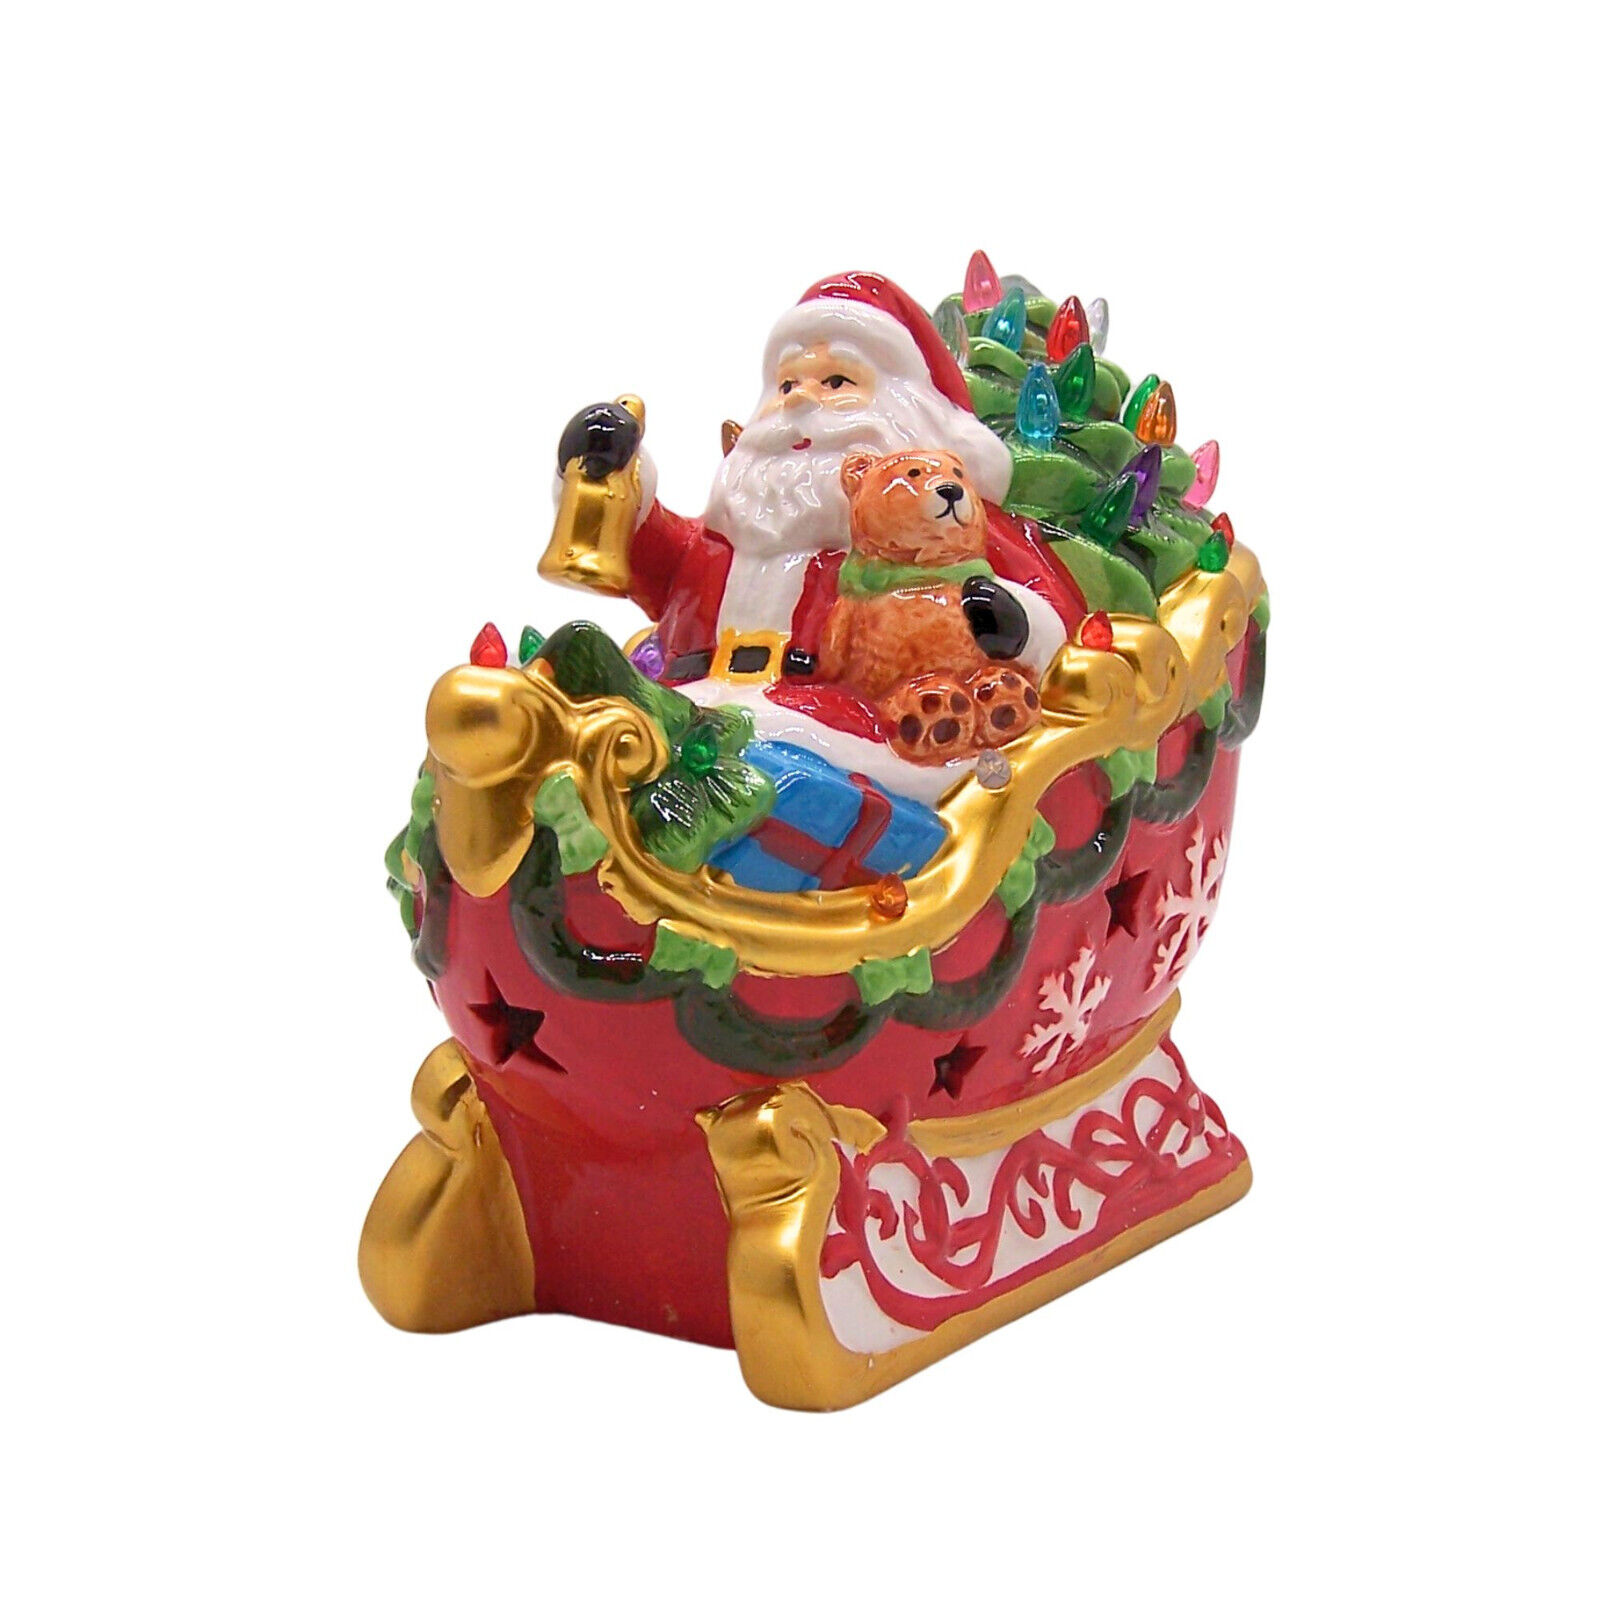 Battery Operated Ceramic Lighted Santa in Sleigh, Christmas Decor and Collection